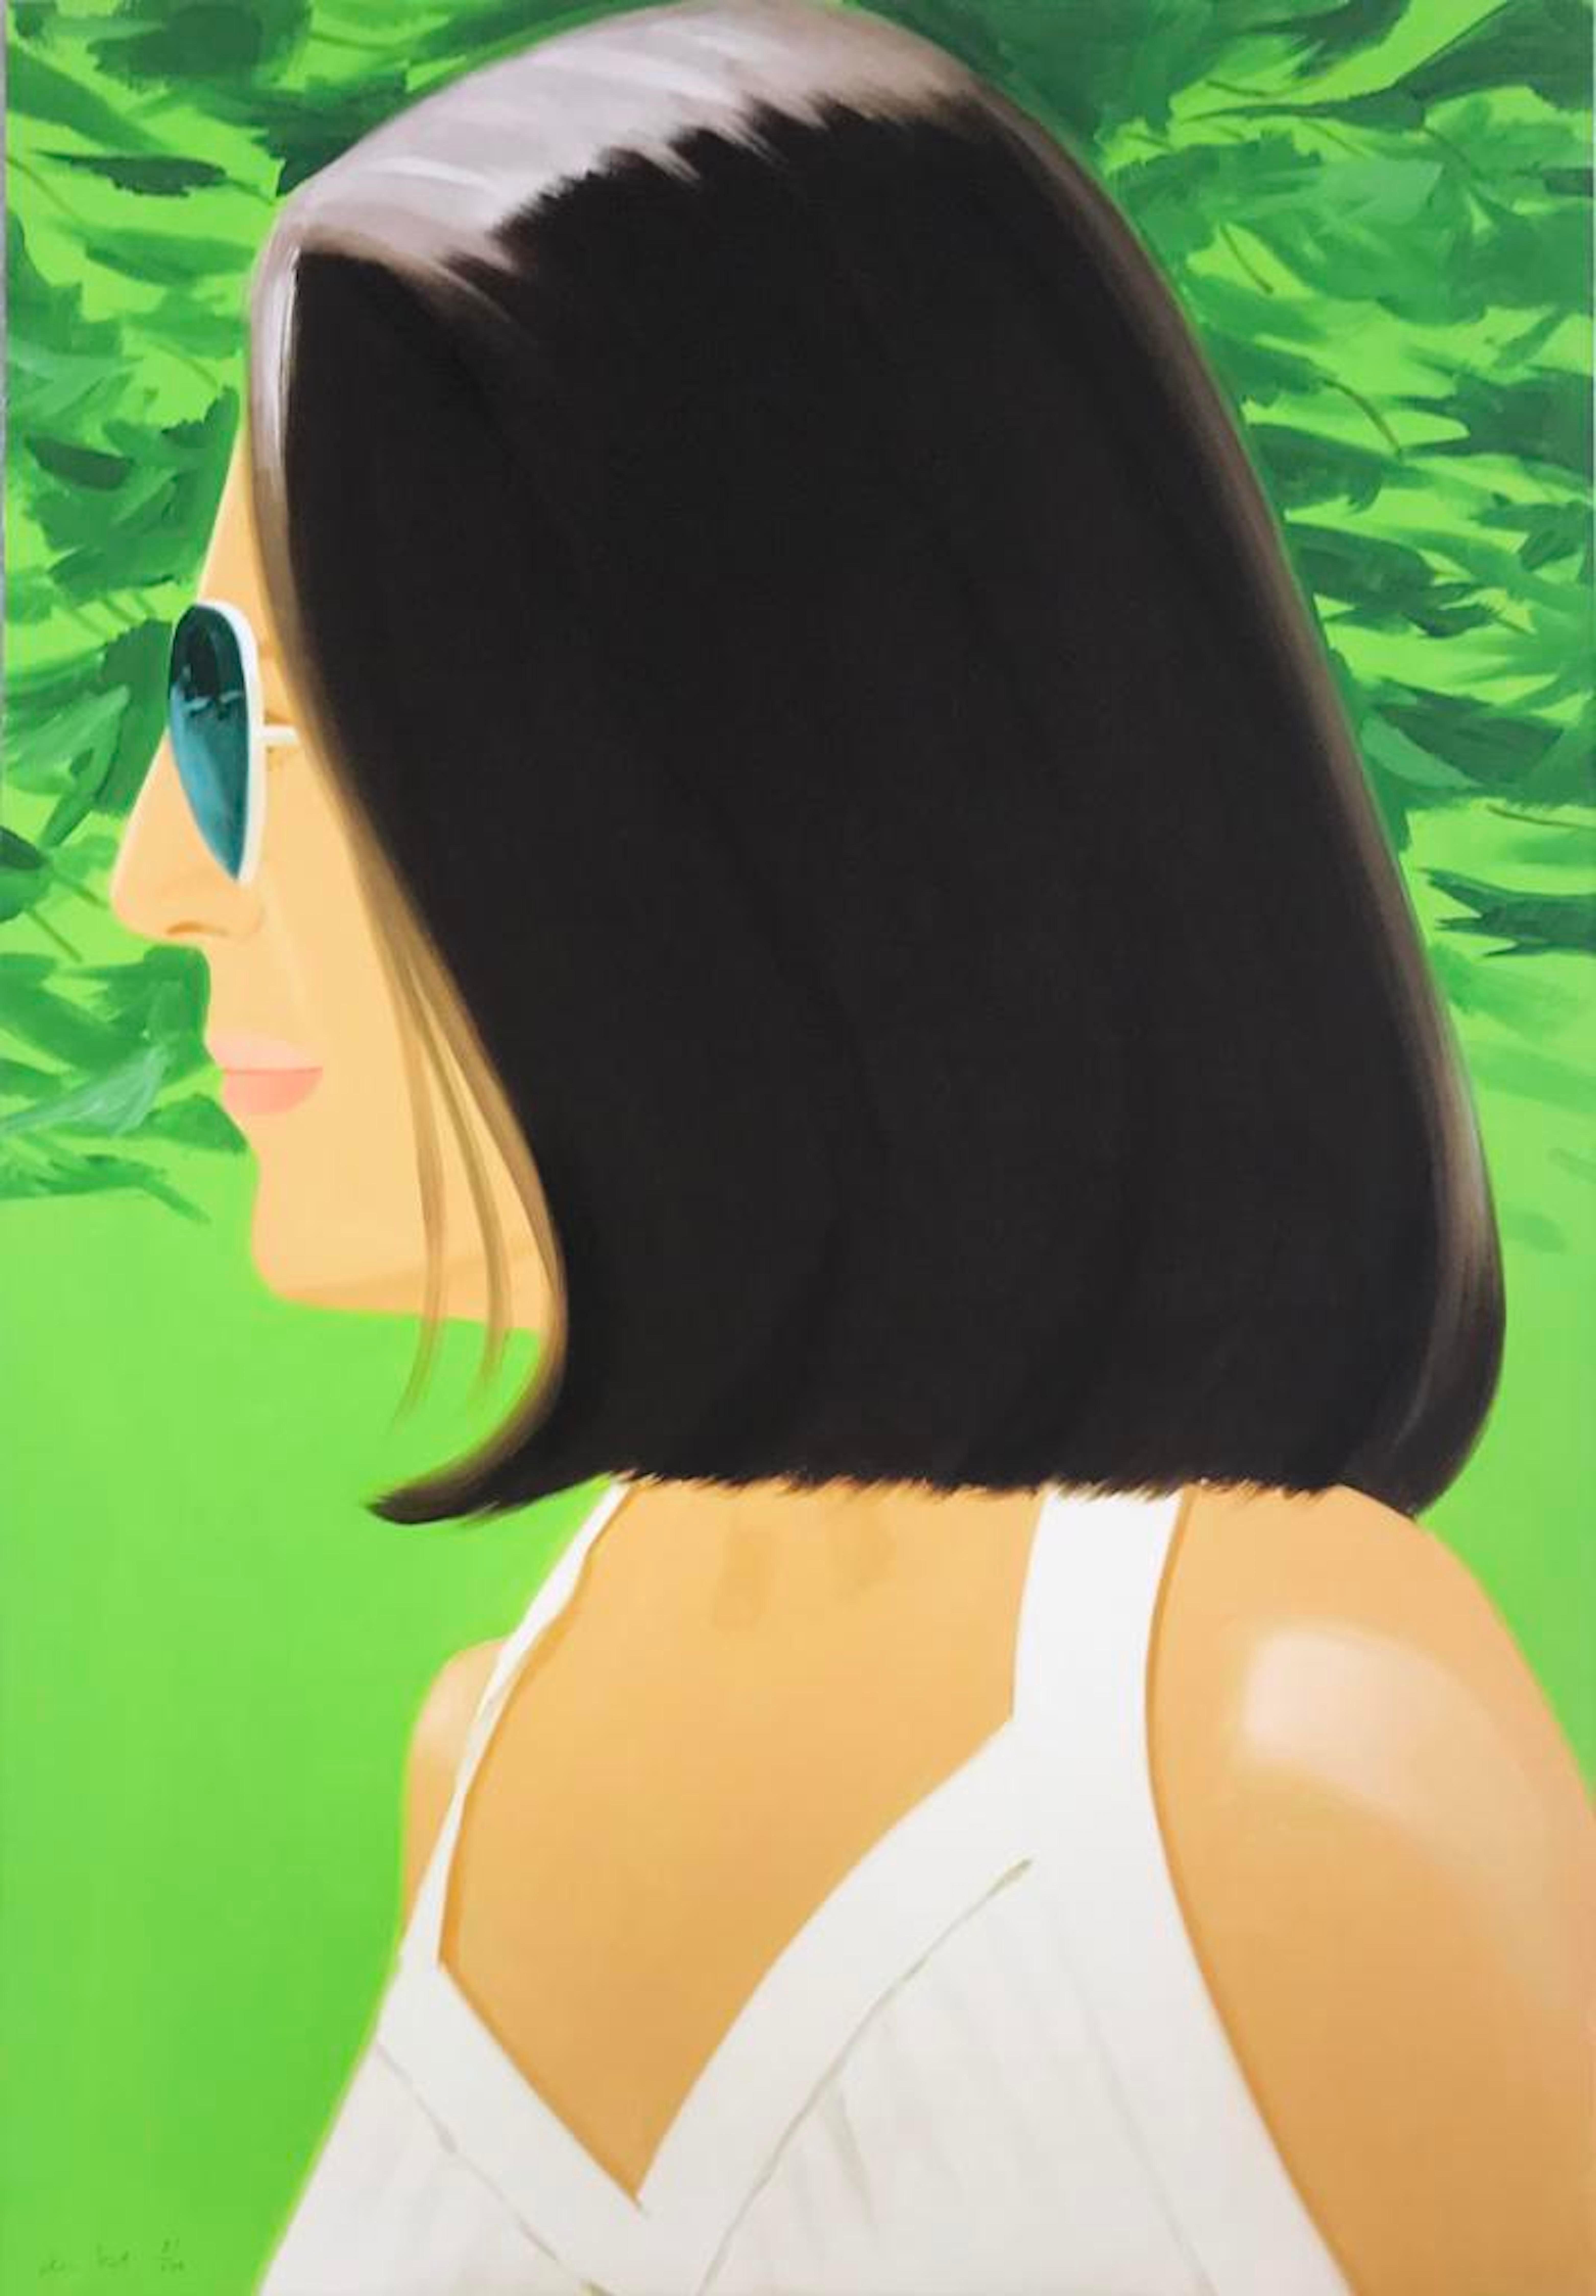 Ada in Spain; 2018; Archival pigment inks on Crane Museo Max 365 gsm paper; 46 x - Print by Alex Katz